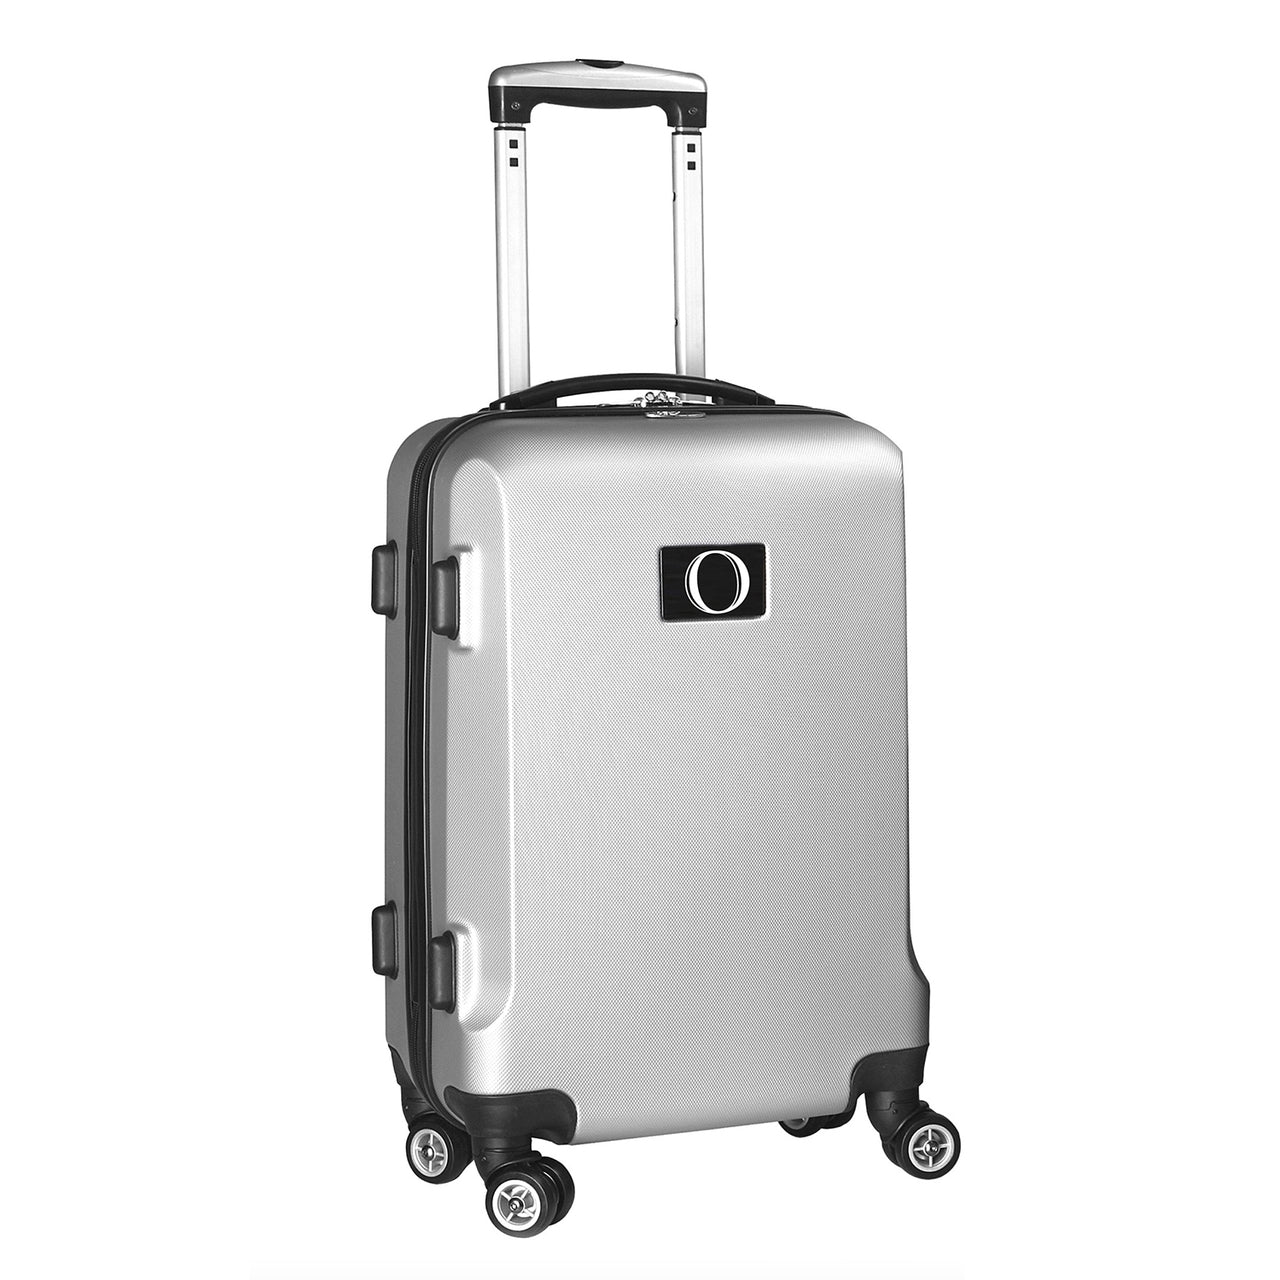 Personalized Initial Name letter "O" 20 inches Carry on Hardcase Spinner Luggage by Mojo in SILVER